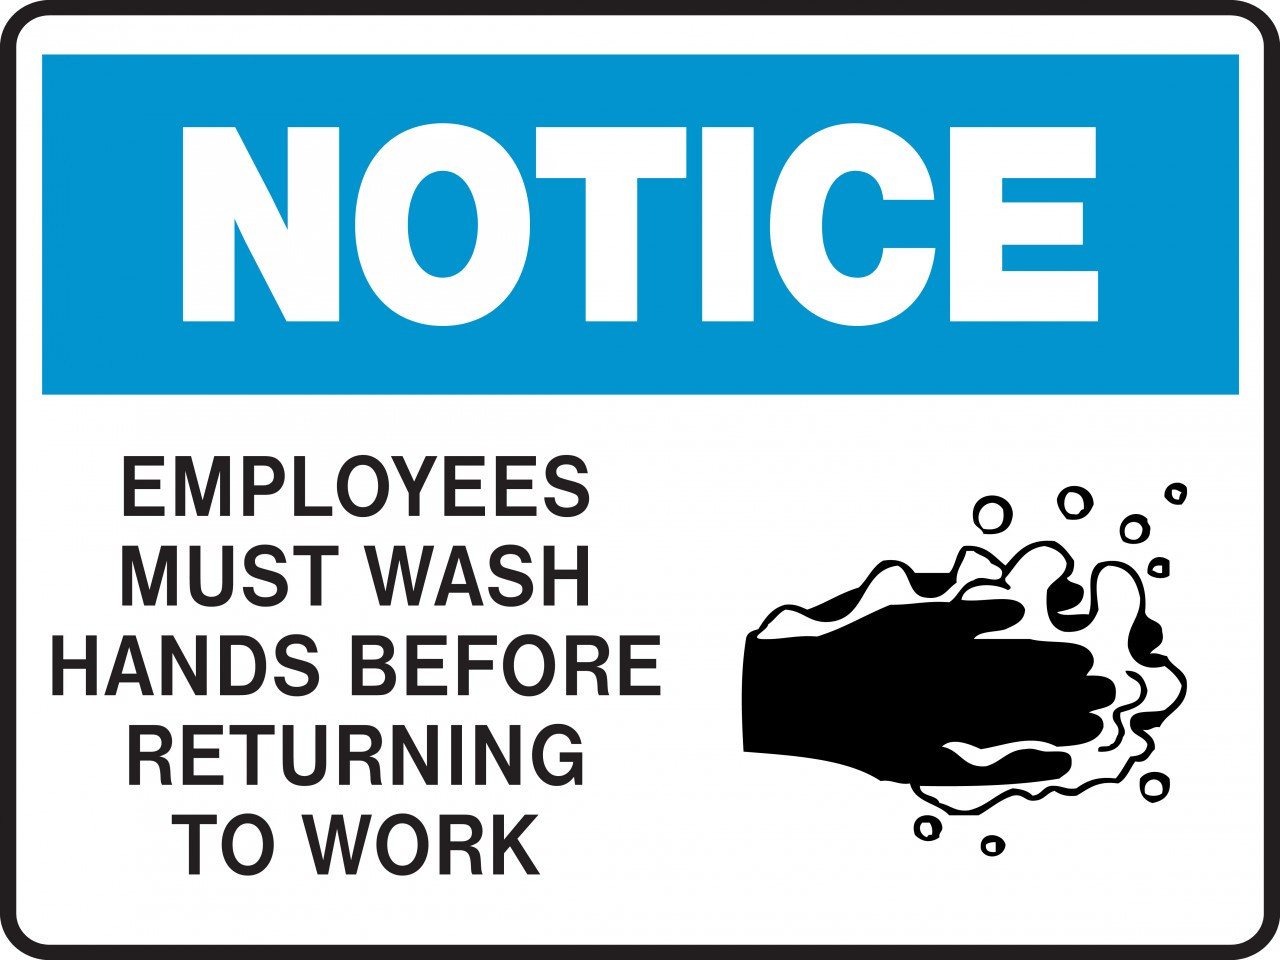 employees wash hands sign